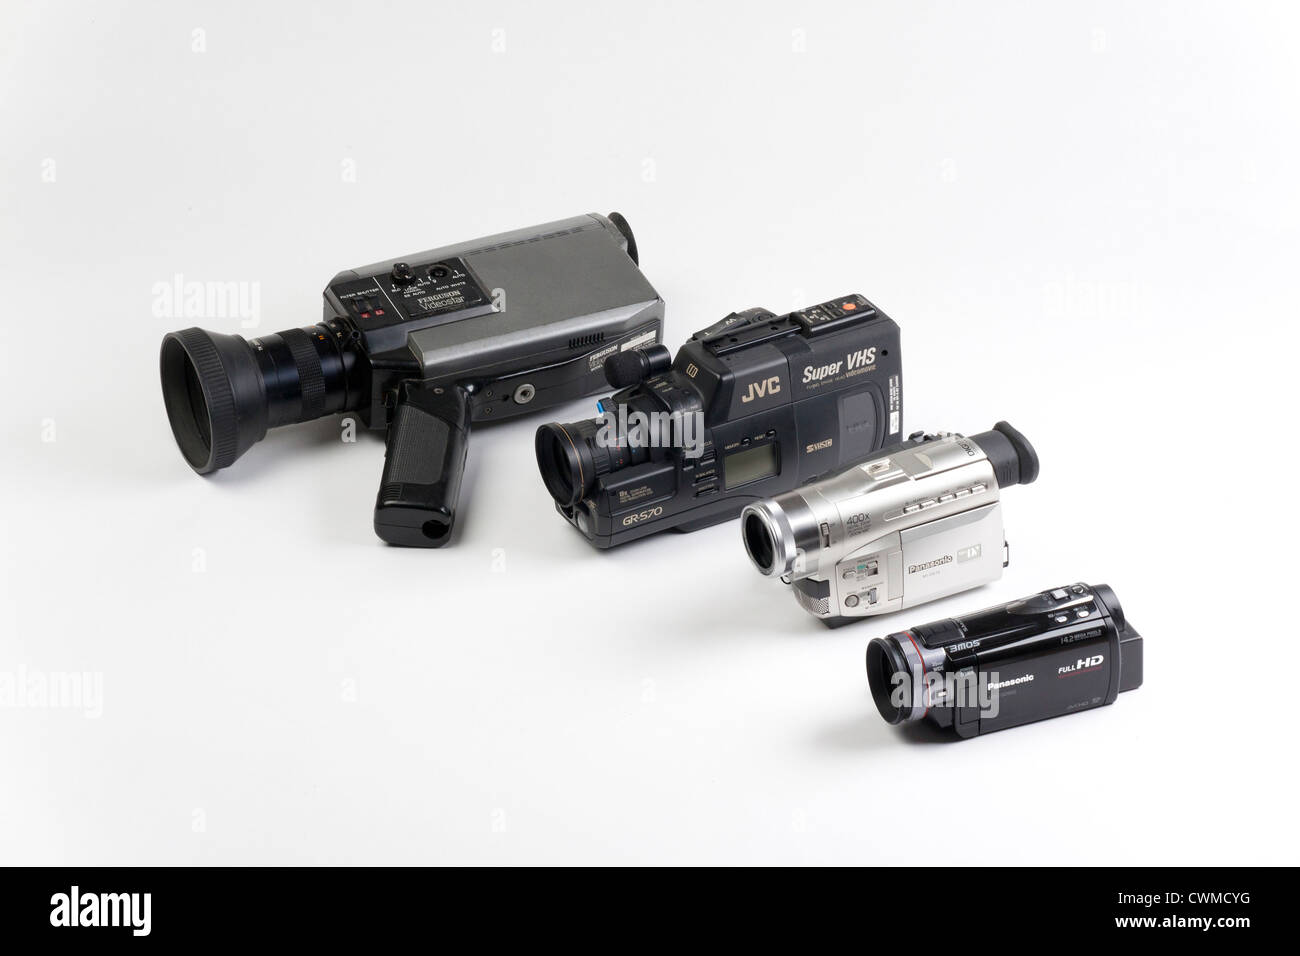 modern camcorder compared to older video cameras Stock Photo